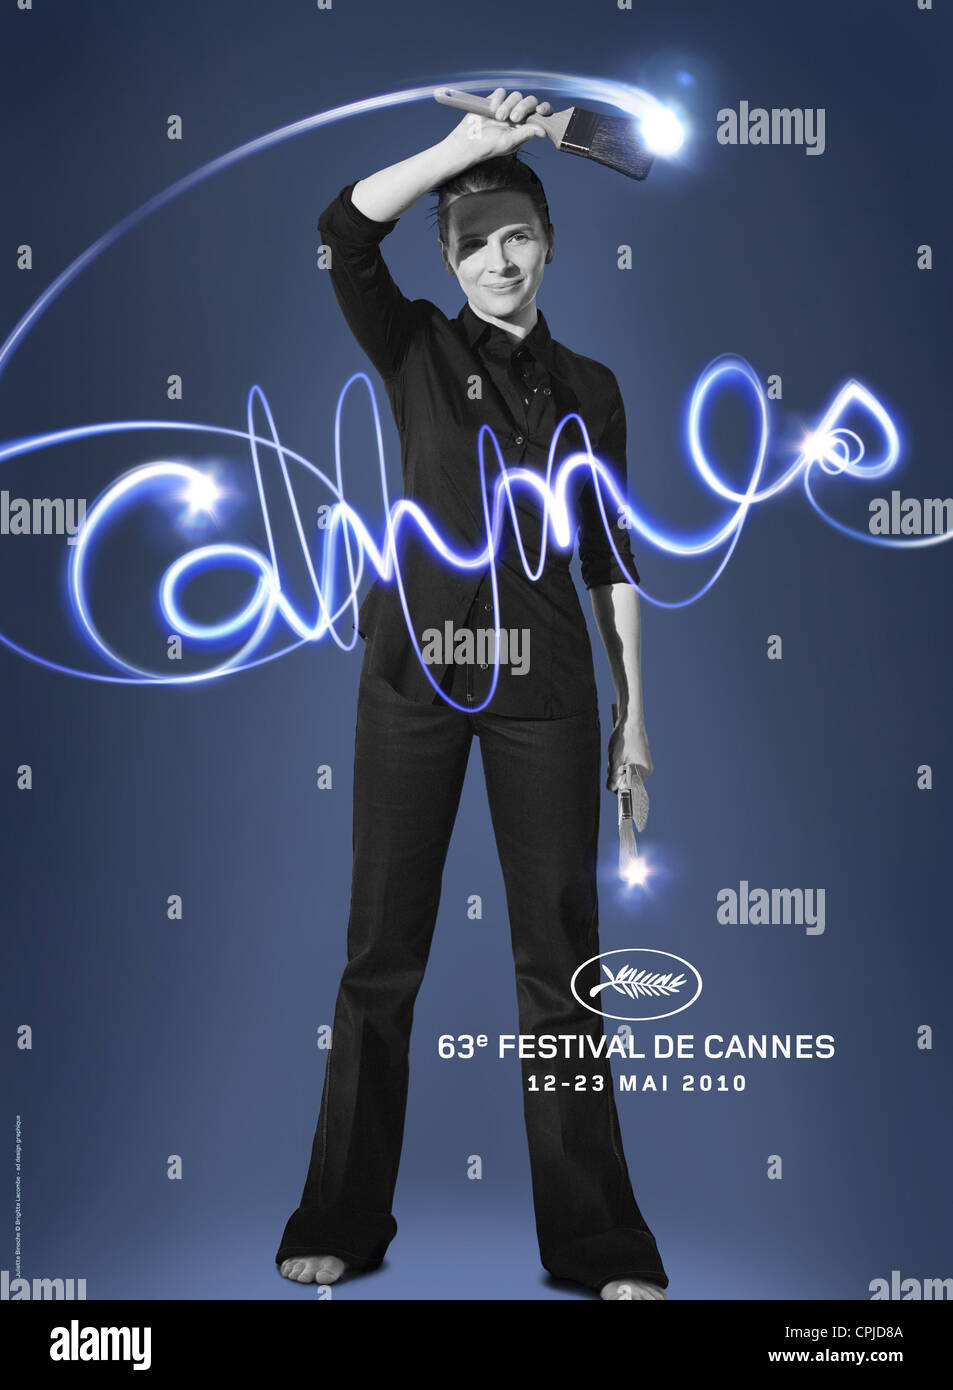 Poster of the Cannes Film Festival 2010 Stock Photo